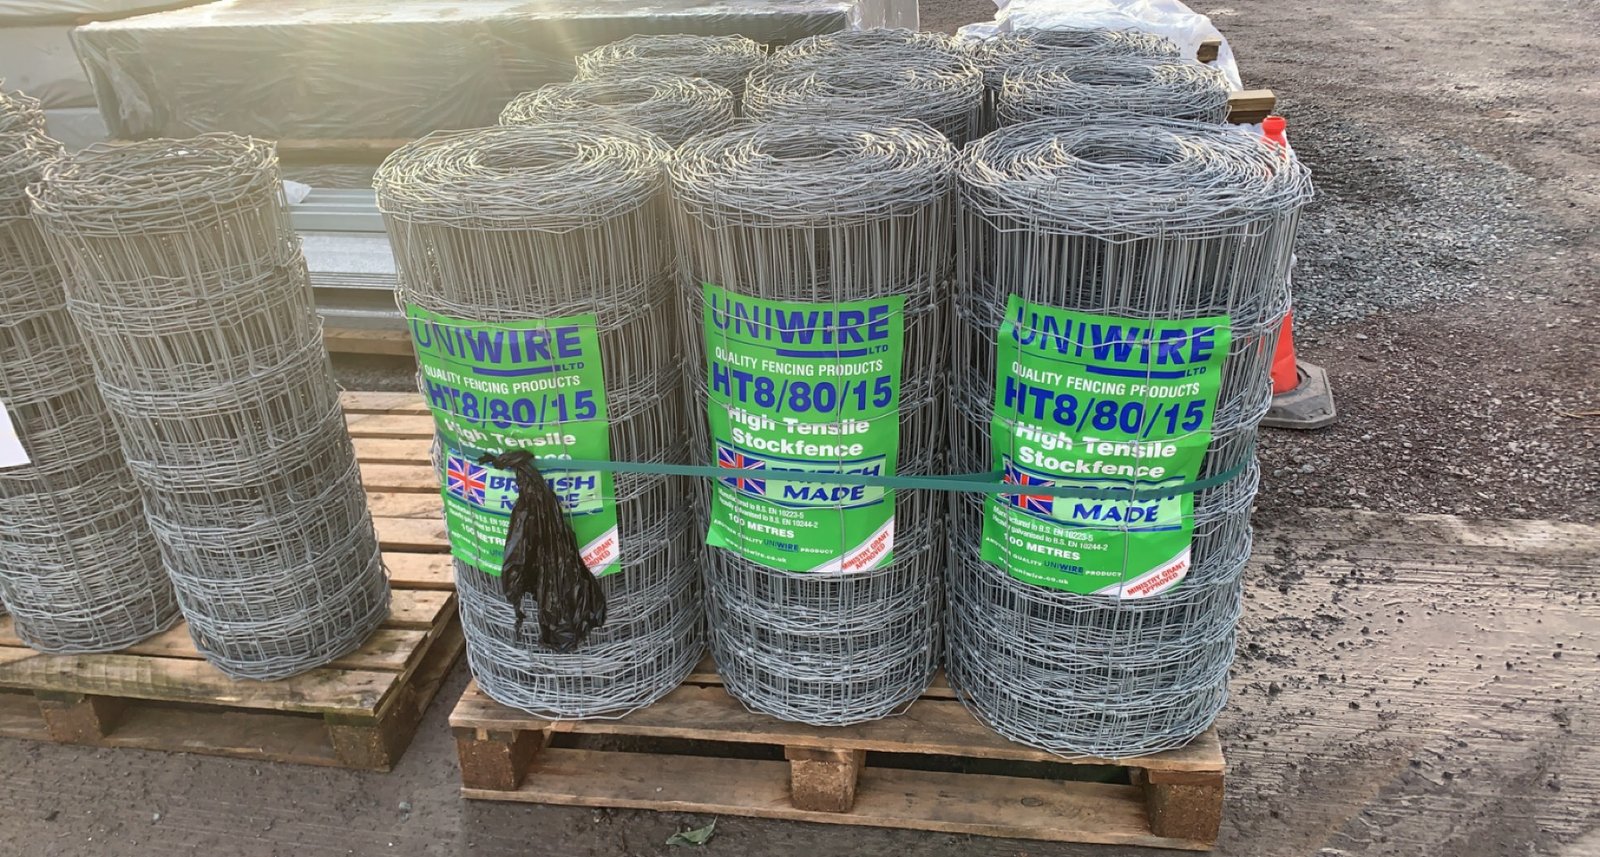 HT8/80/15 High Tensile Sheep Wire Featured Image